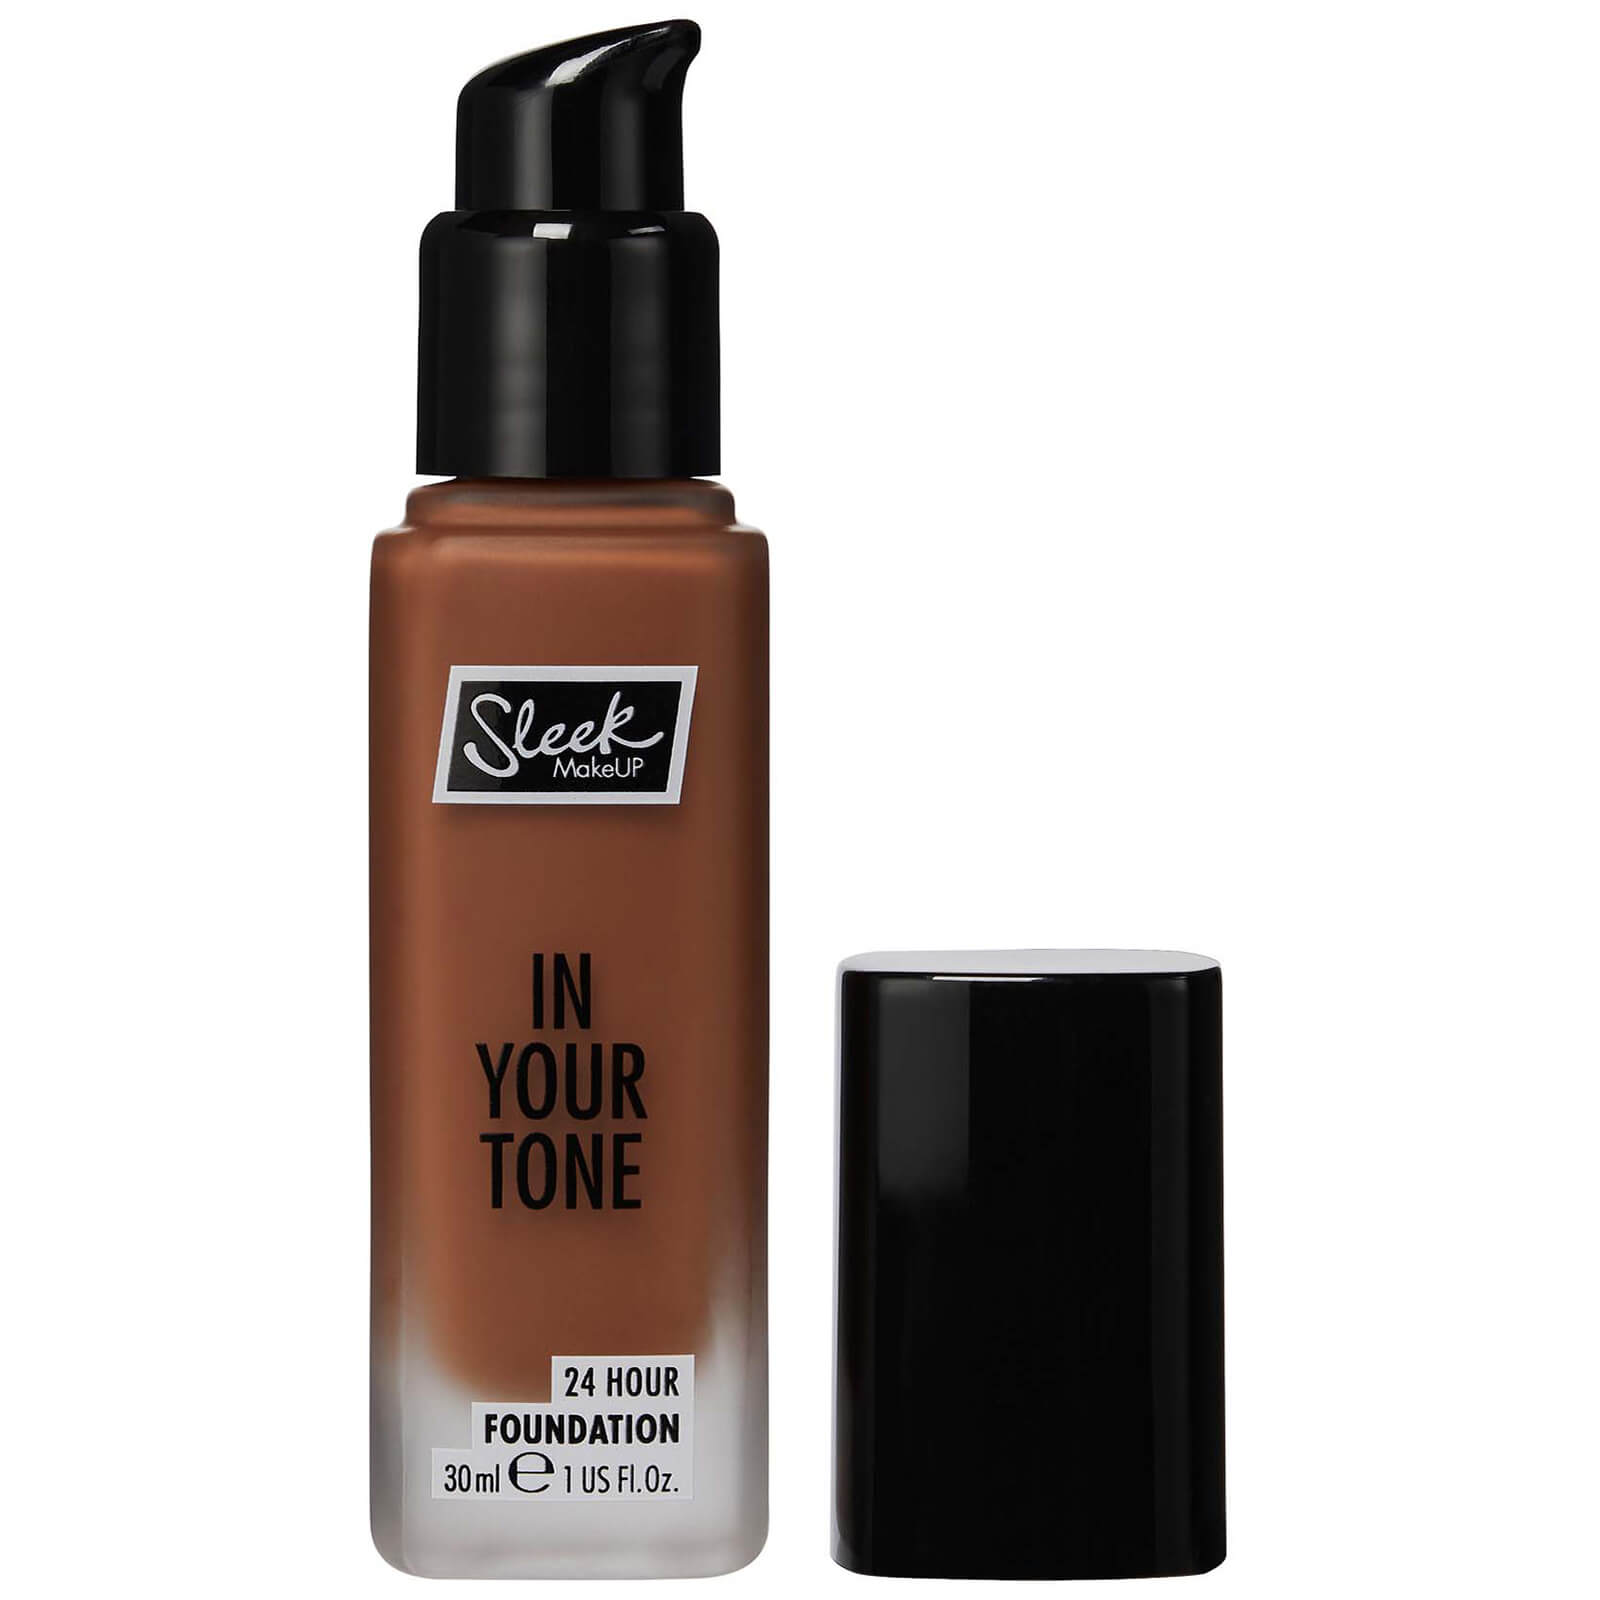 Sleek MakeUP in Your Tone 24 Hour Foundation 30ml (Various Shades) - 11N